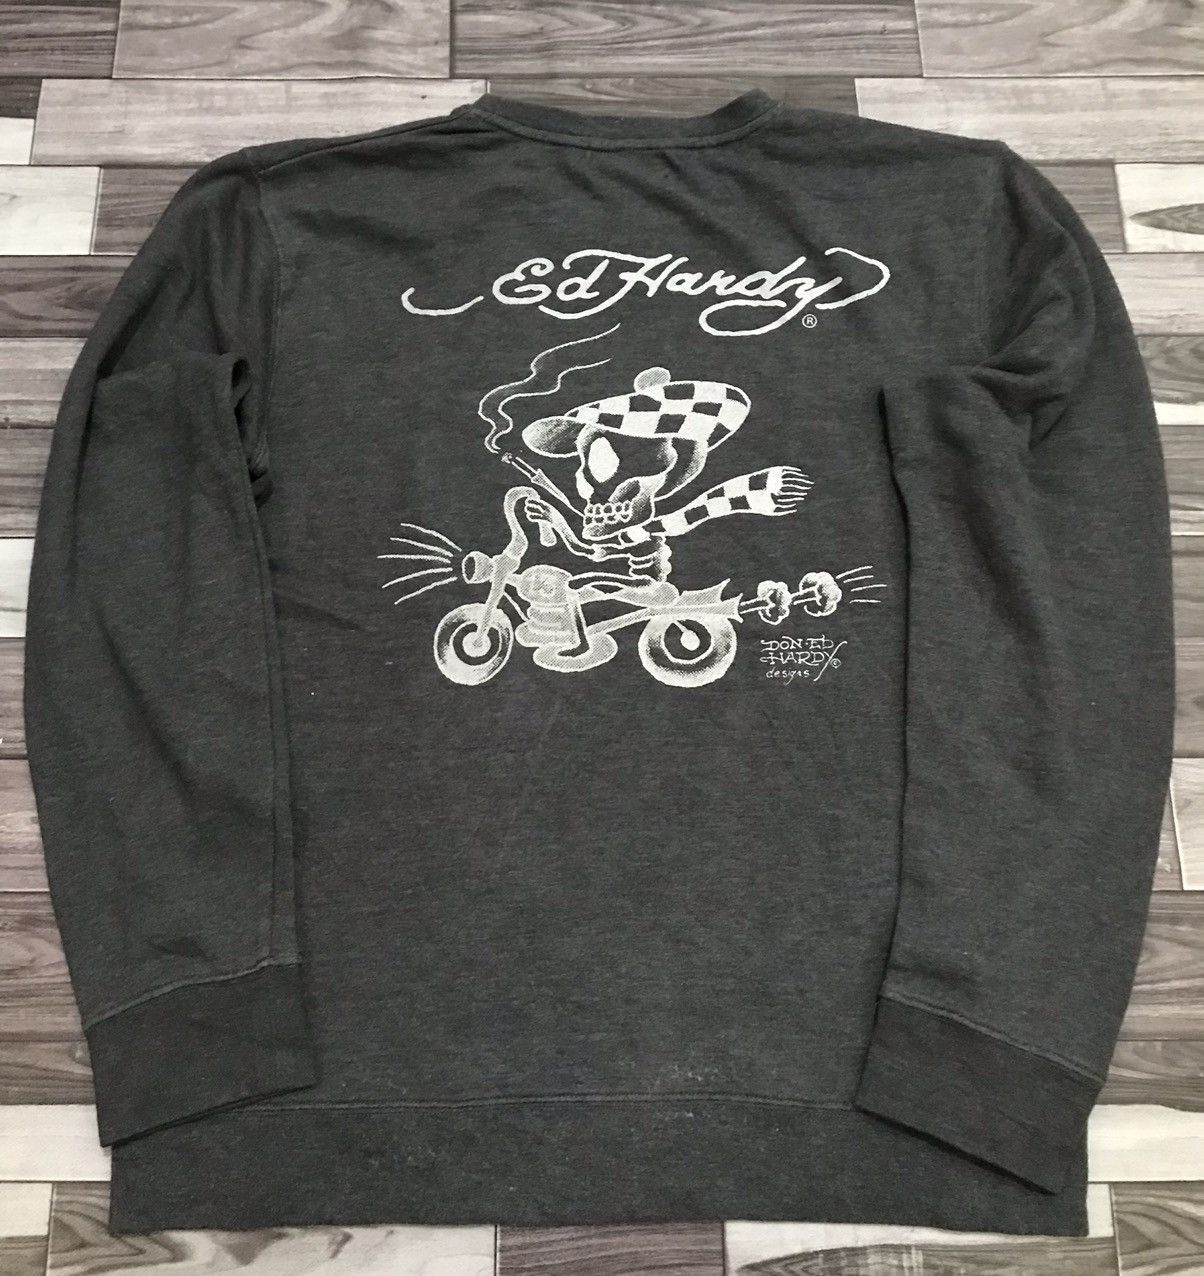 Don Ed Hardy Pullover Jumper Sweater -R5 - 1